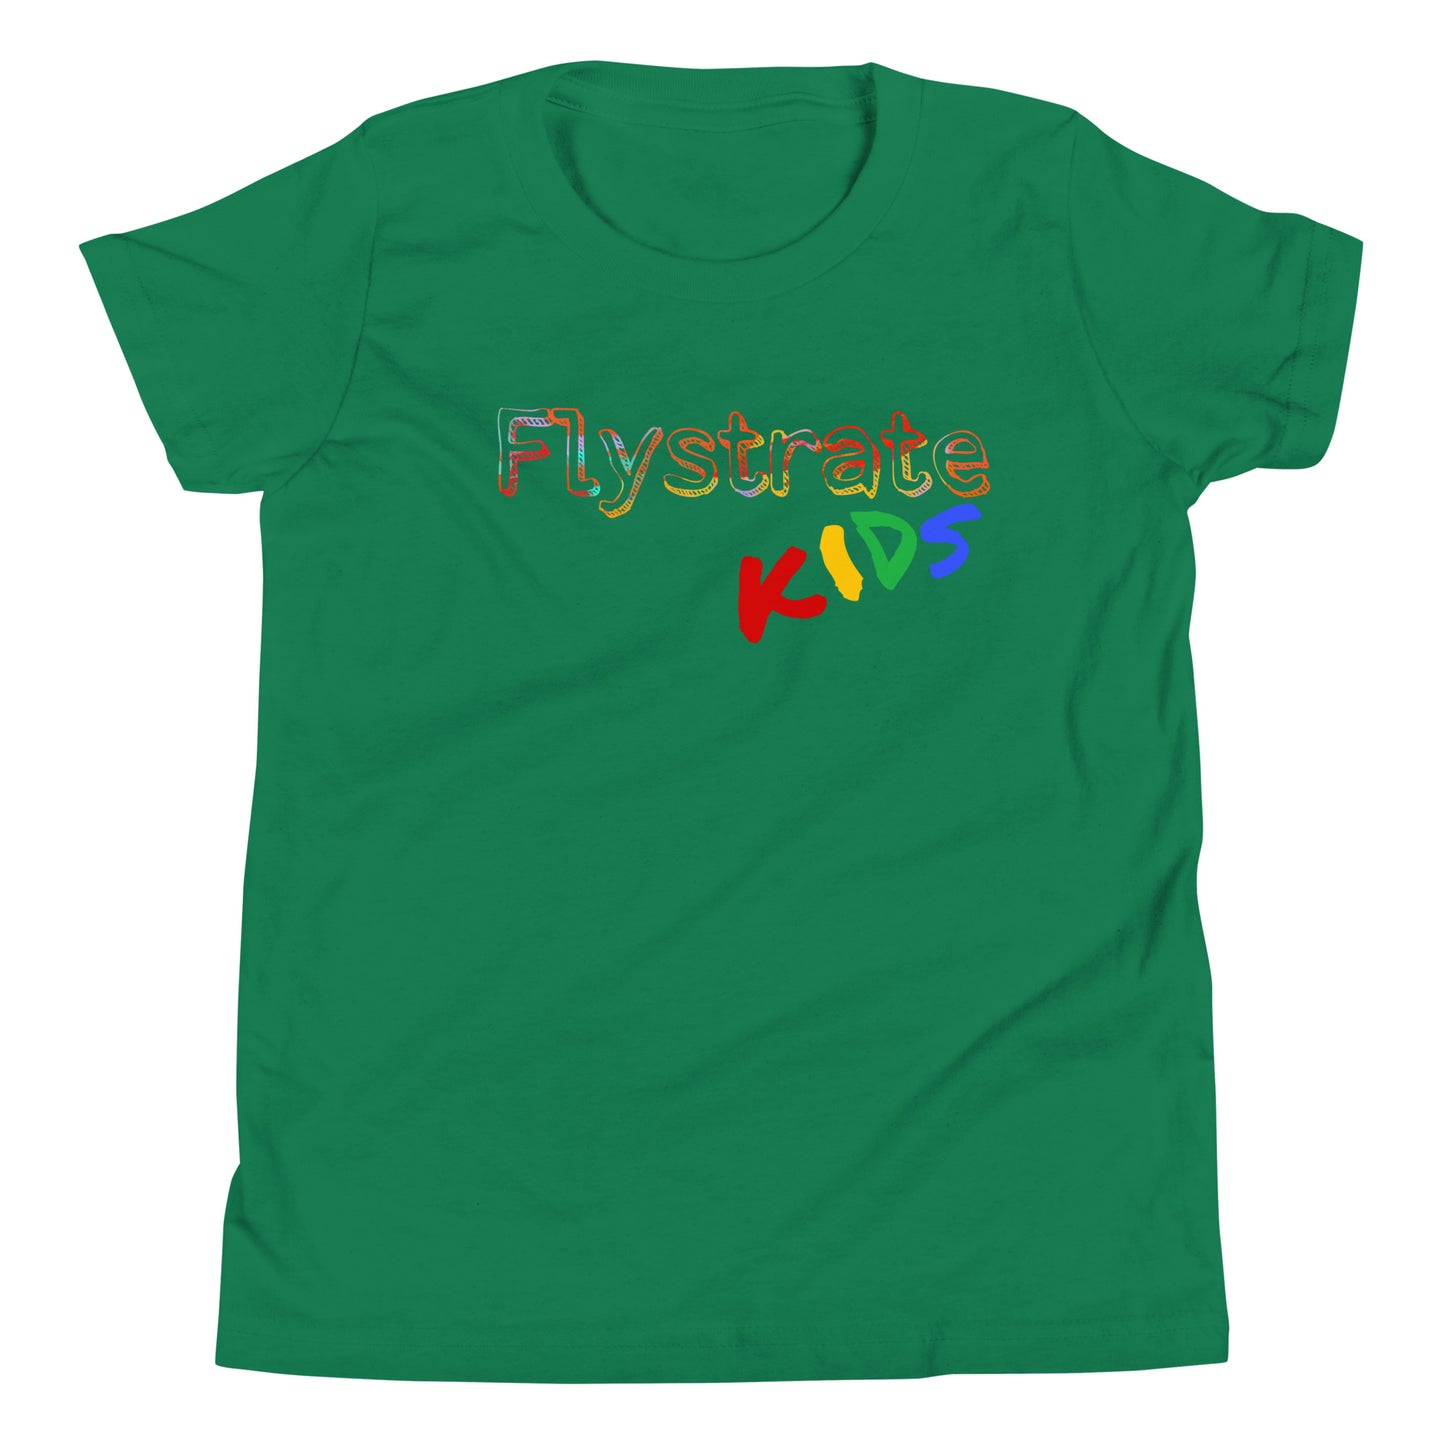 Flystrate kids Youth Short Sleeve T-Shirt